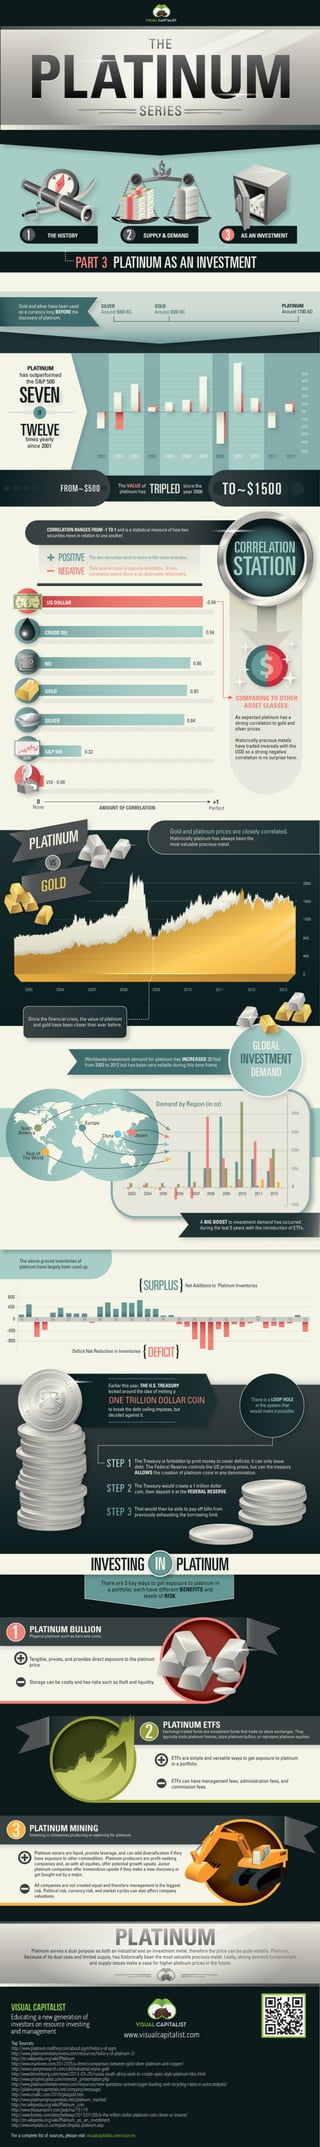 Platinum as an Investment - Visual Capitalist